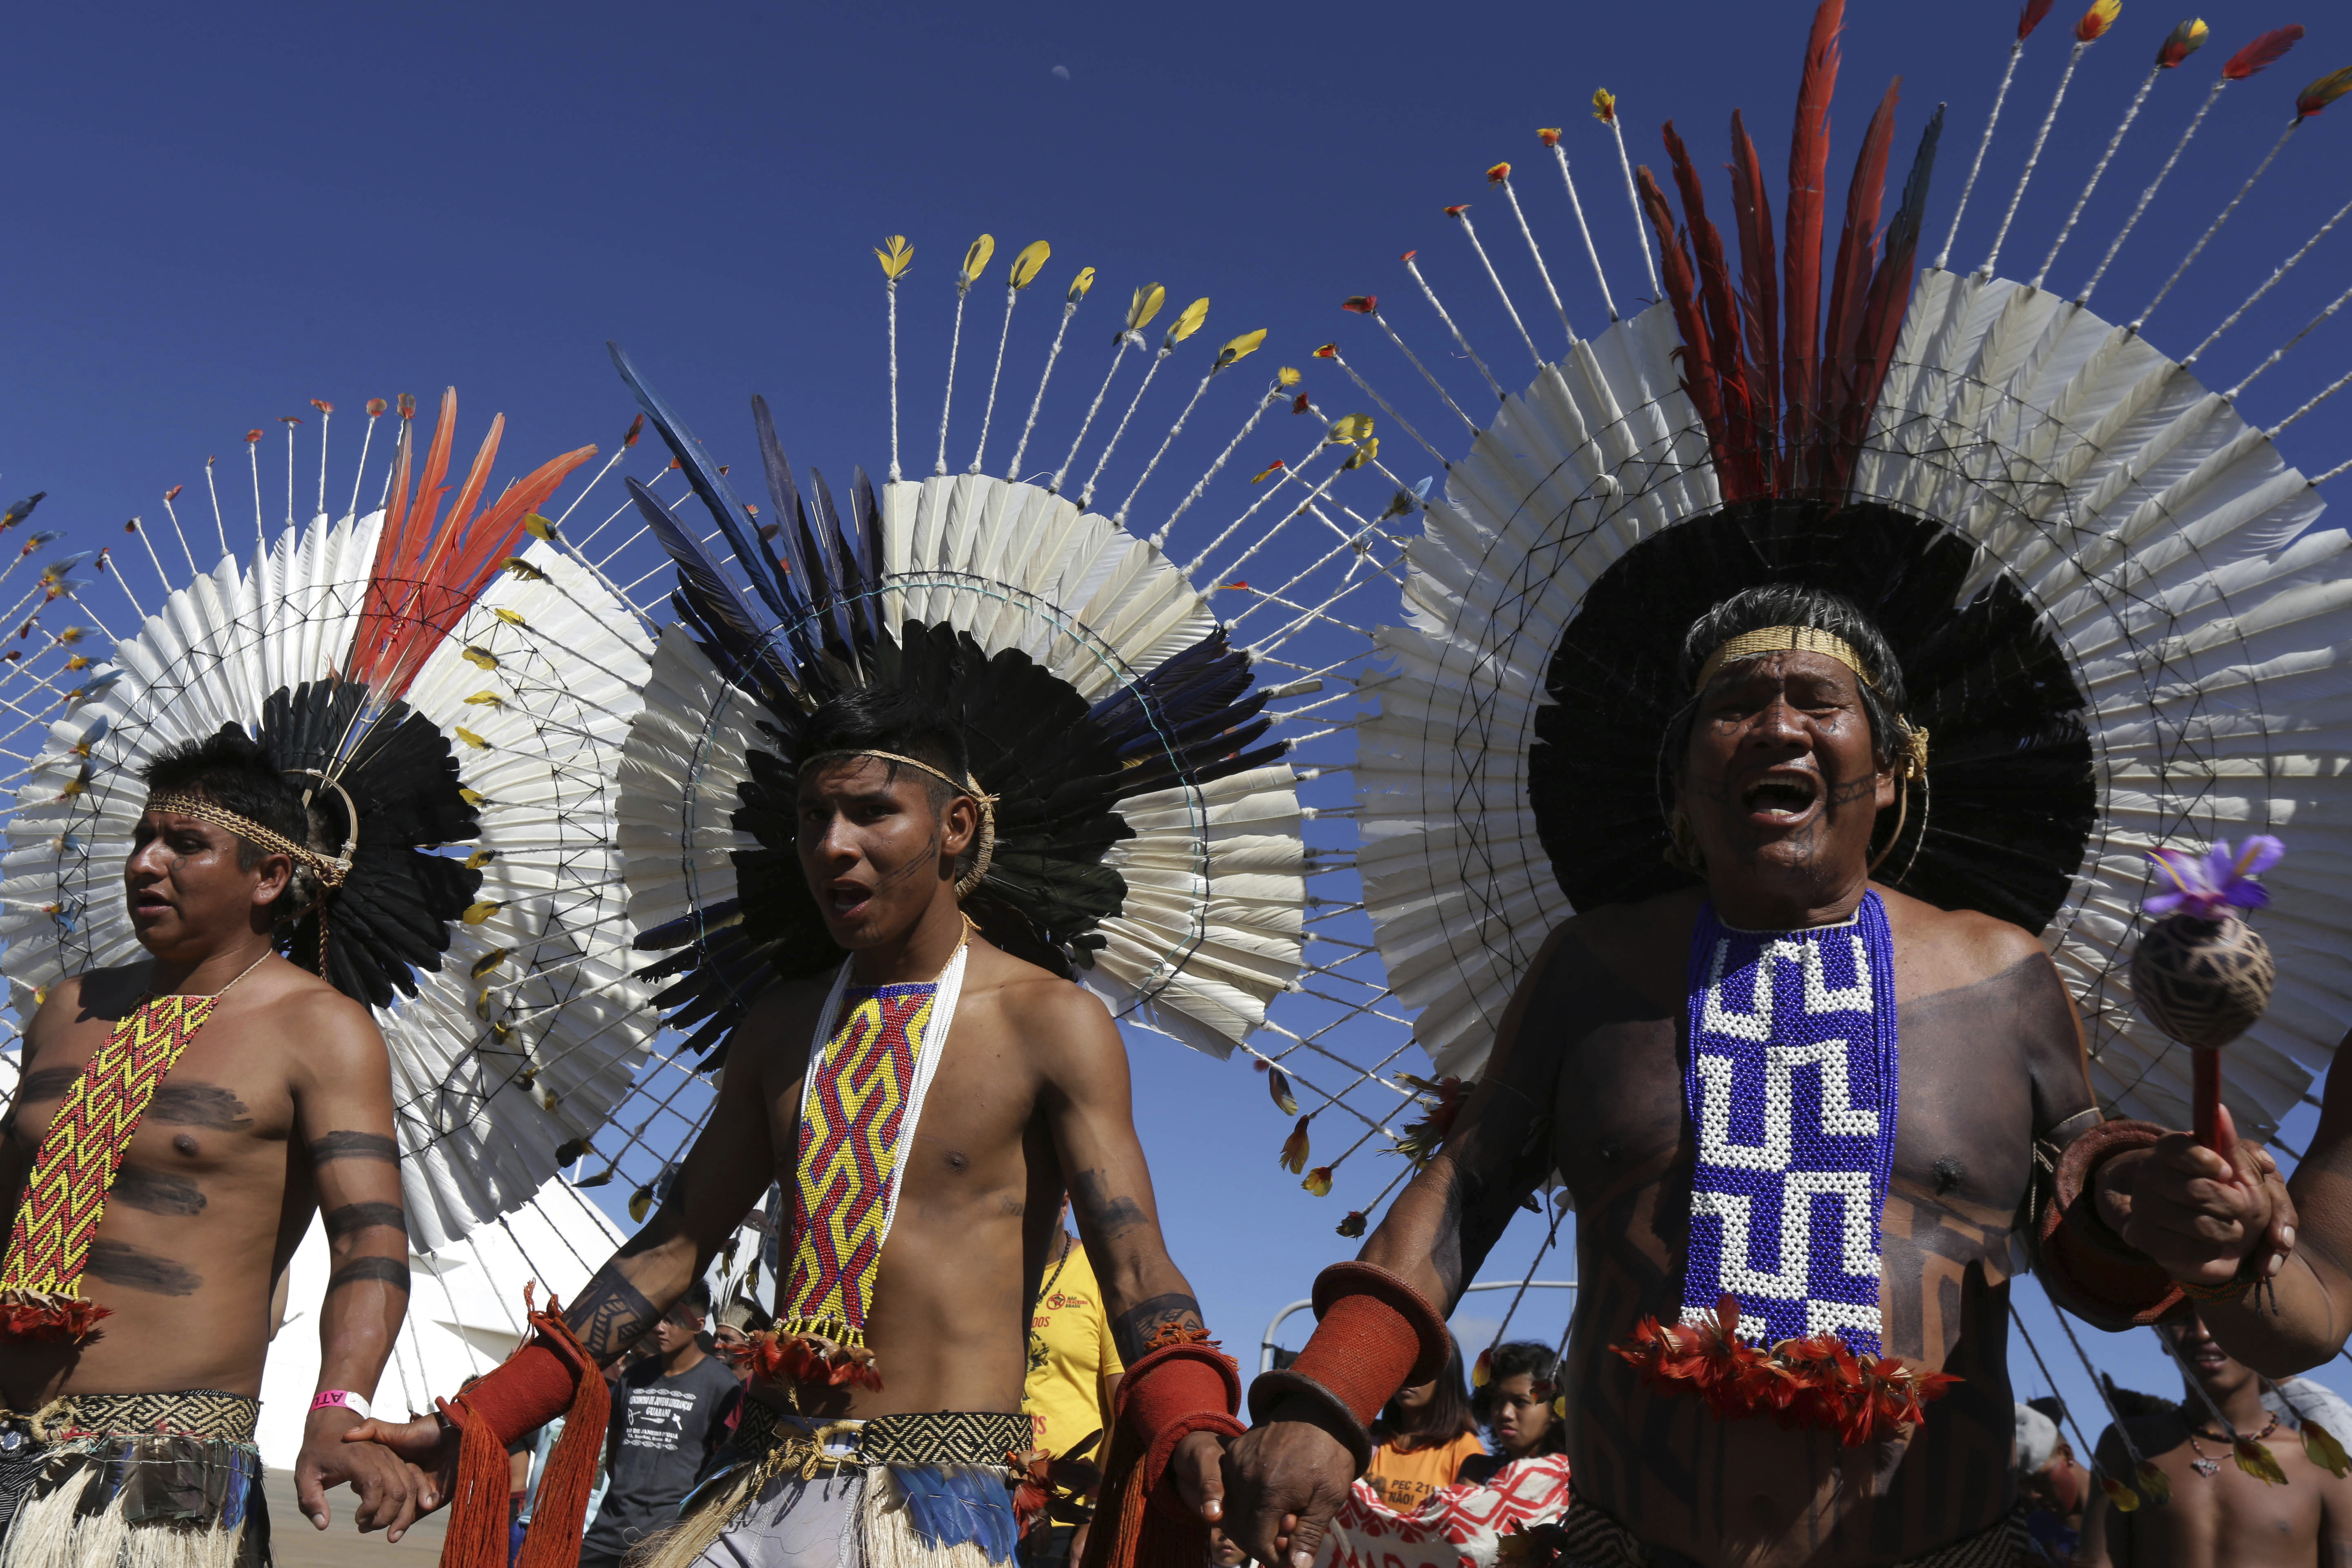 Kamaiuras indigenous men sing ritual songs during the big march of the annual three-day campout protest known as The Free Land Encampment, to protest what they see as rollbacks of indigenous rights under President Jair Bolsonaro, in Brasilia, Brazil, Friday, April 26, 2019. Before becoming president, Bolsonaro promised that if he were elected, 